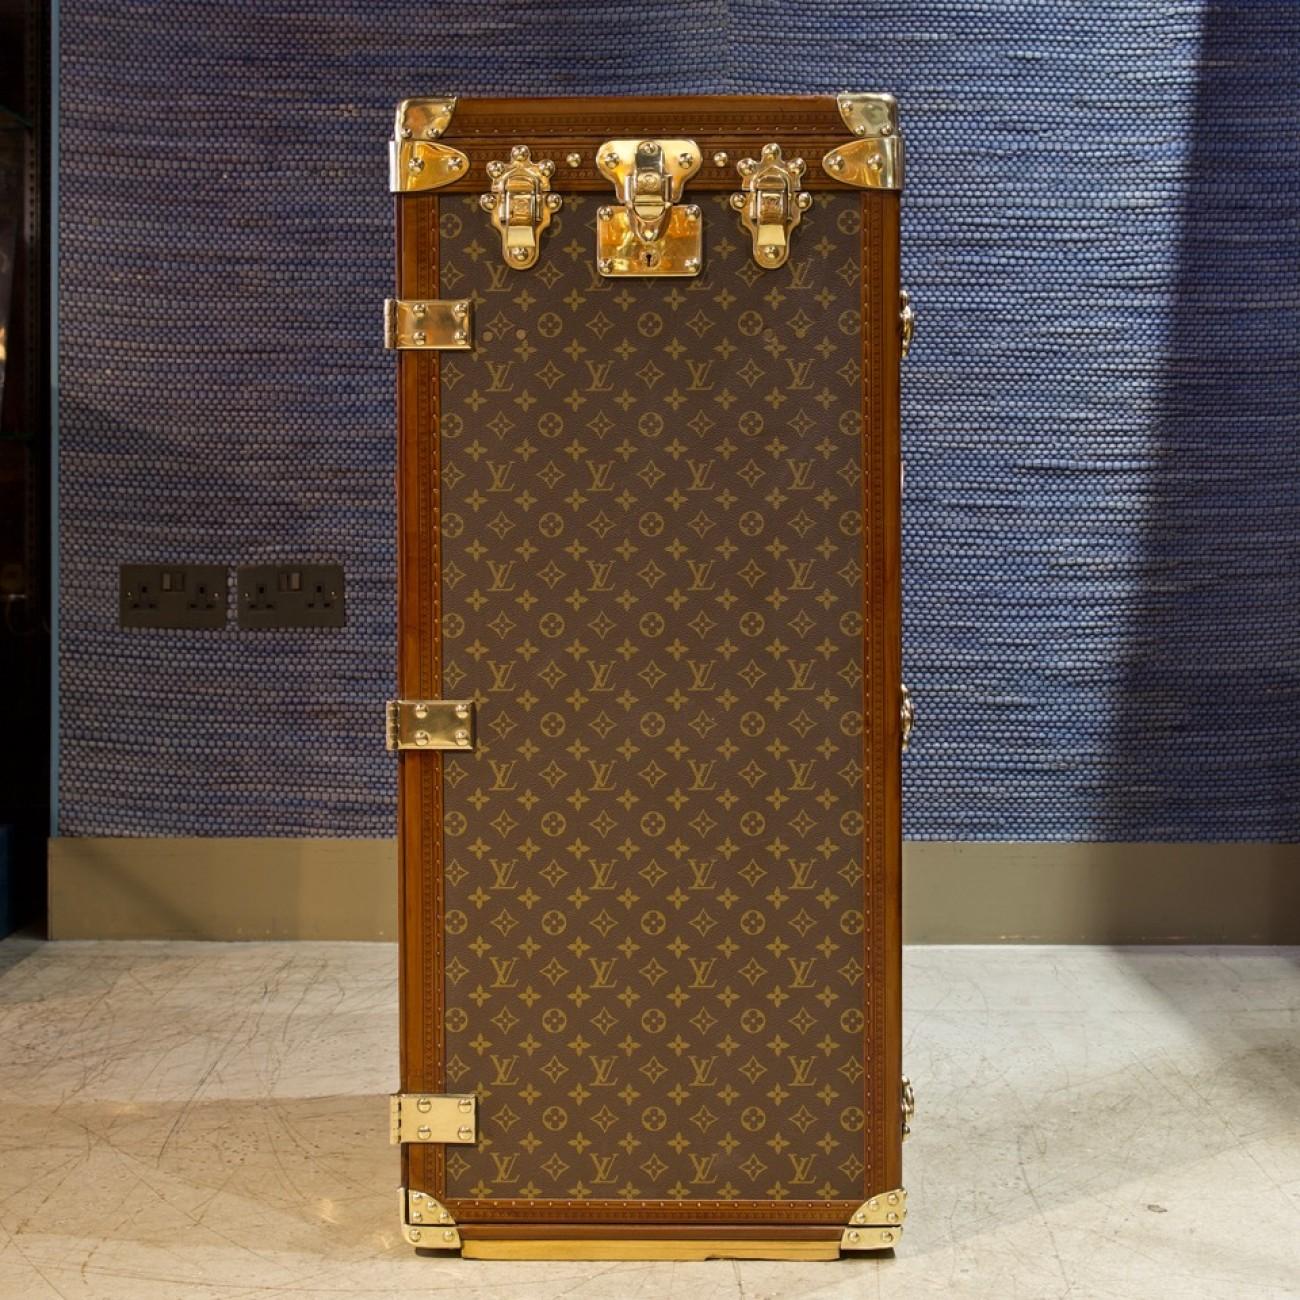 In July 1929, the world famous conductor Leopold Stokowski asked Georges Vuitton to design and manufacture a special-order travelling office trunk for his voyages around the globe.

The original trunk made for Stokowski had:
(internally)-

A box for